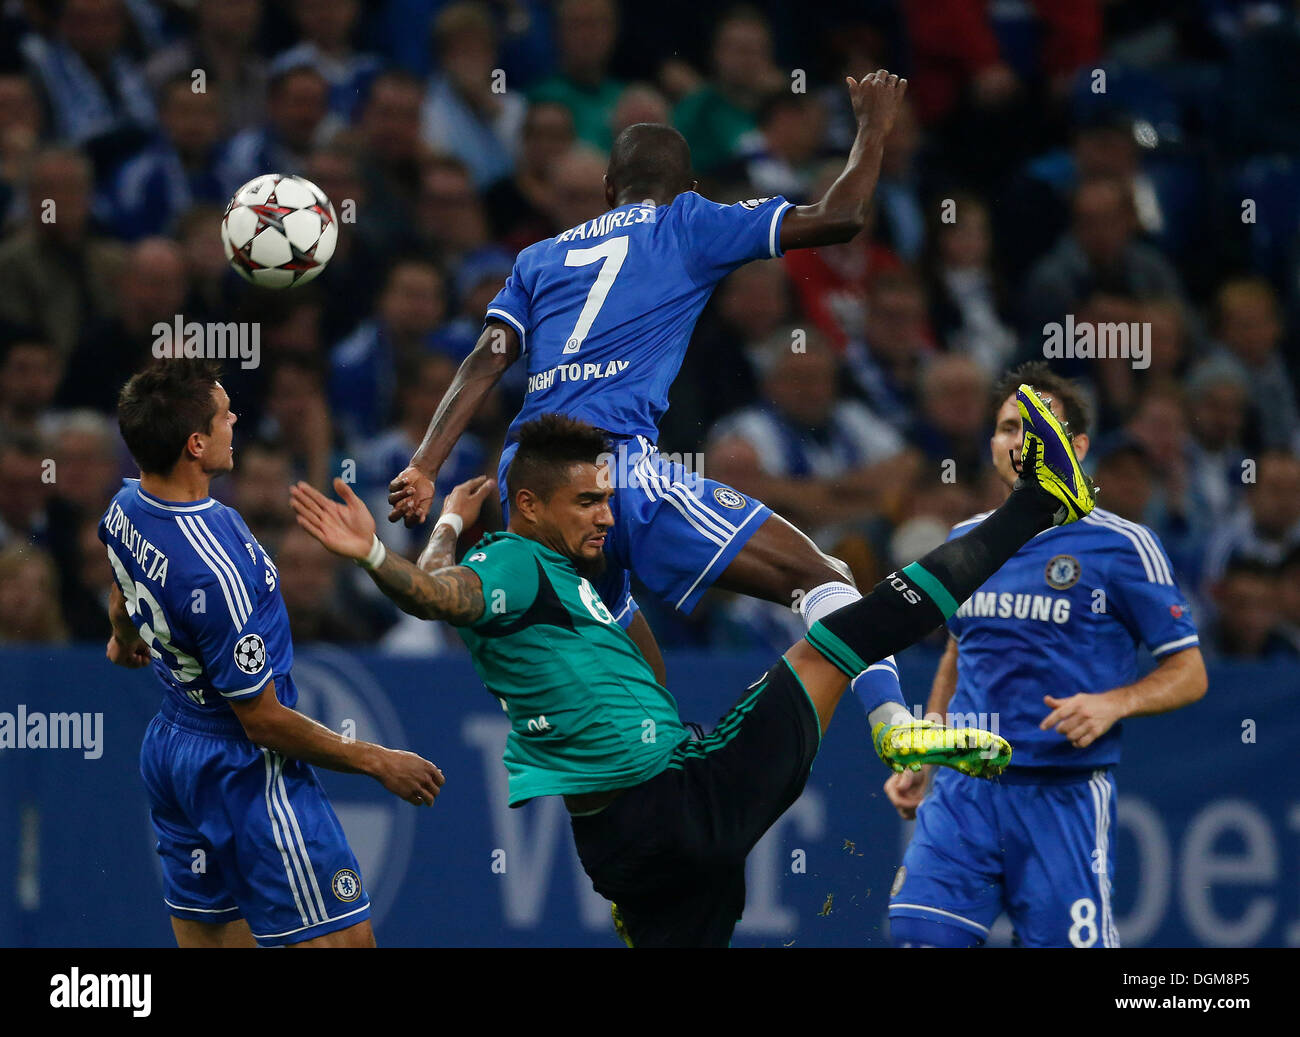 Chelsea V Fc Schalke 04 High Resolution Stock Photography and Images - Alamy